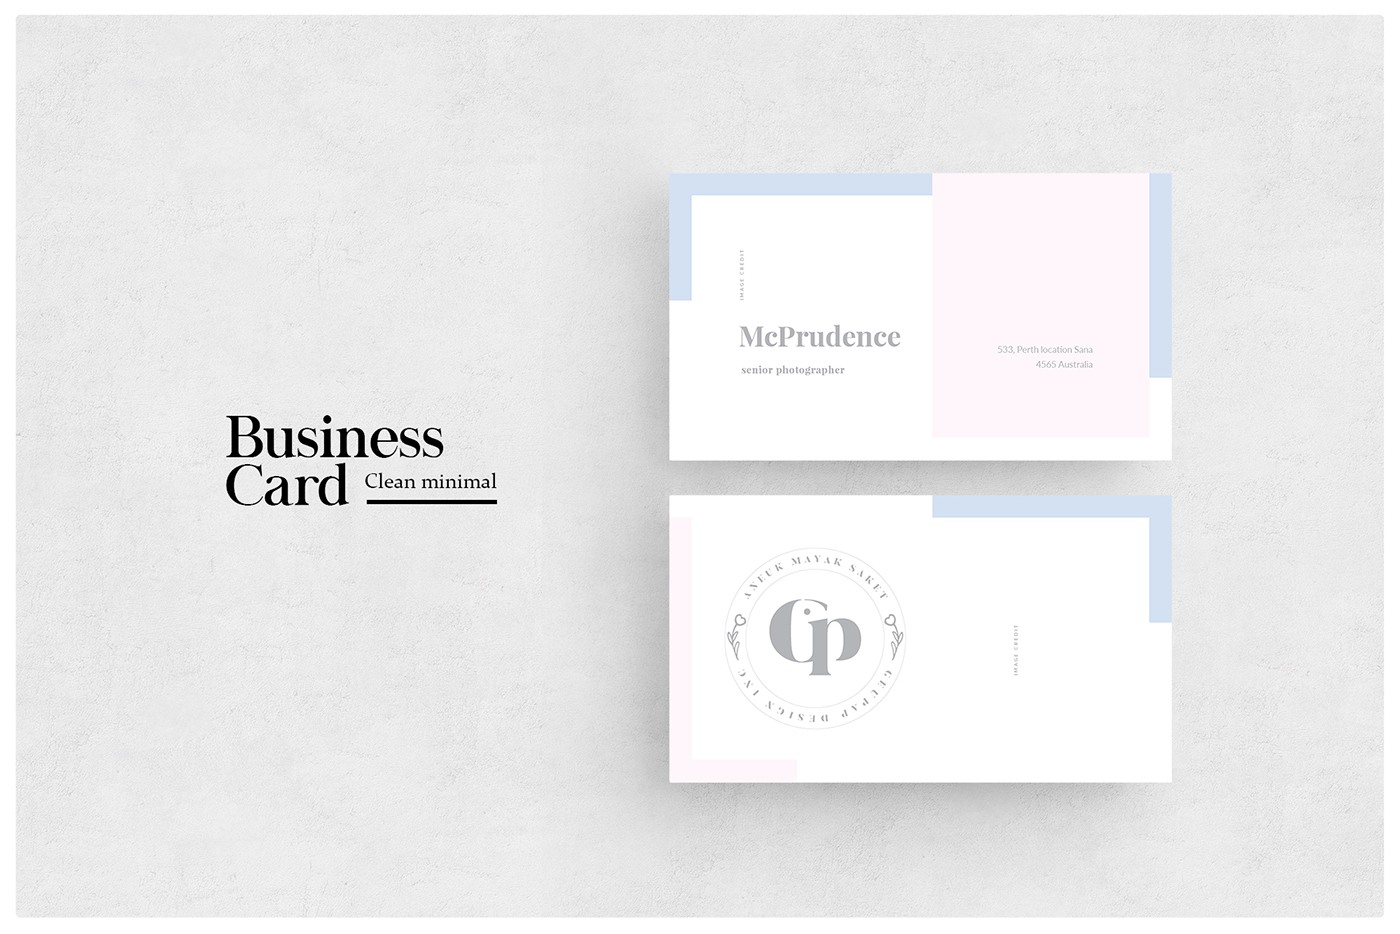 photographer Photography  Wedding Photography Photographer Contract business card brochure contract trifold square portfolio